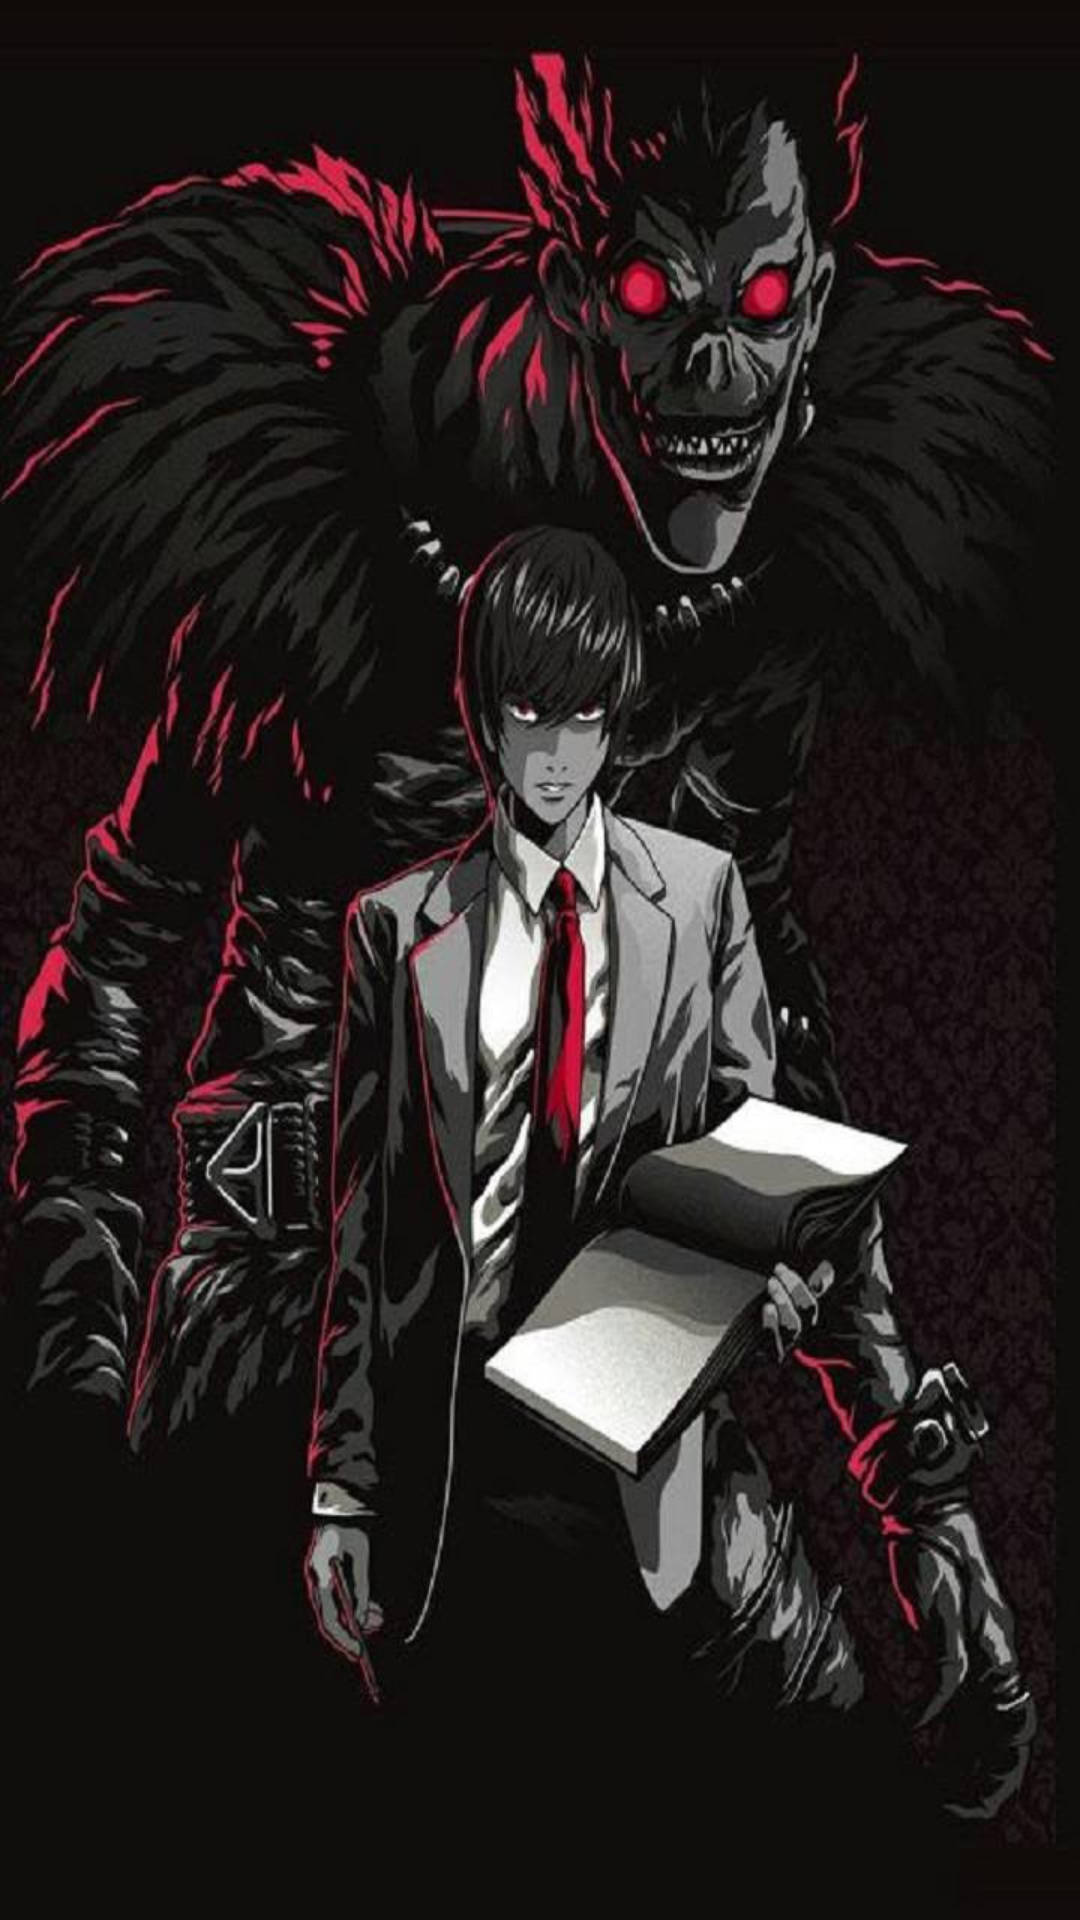 Download Light And Ryuk Glowing Red Death Note Iphone Wallpaper | Wallpapers .com